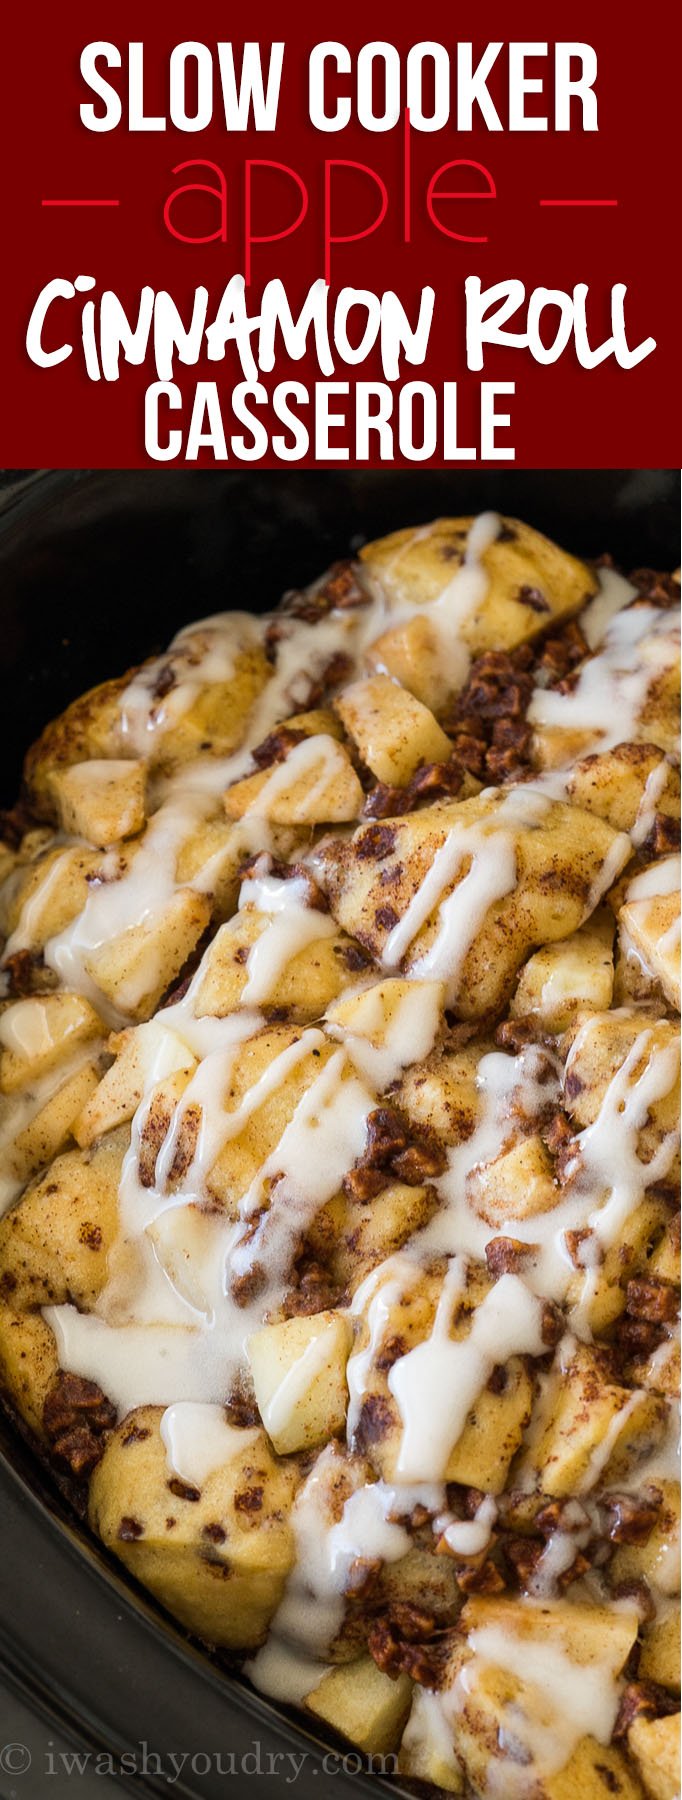 Just toss the ingredients in your crock pot and this Slow Cooker Apple Cinnamon Roll Bake will be ready in a flash!